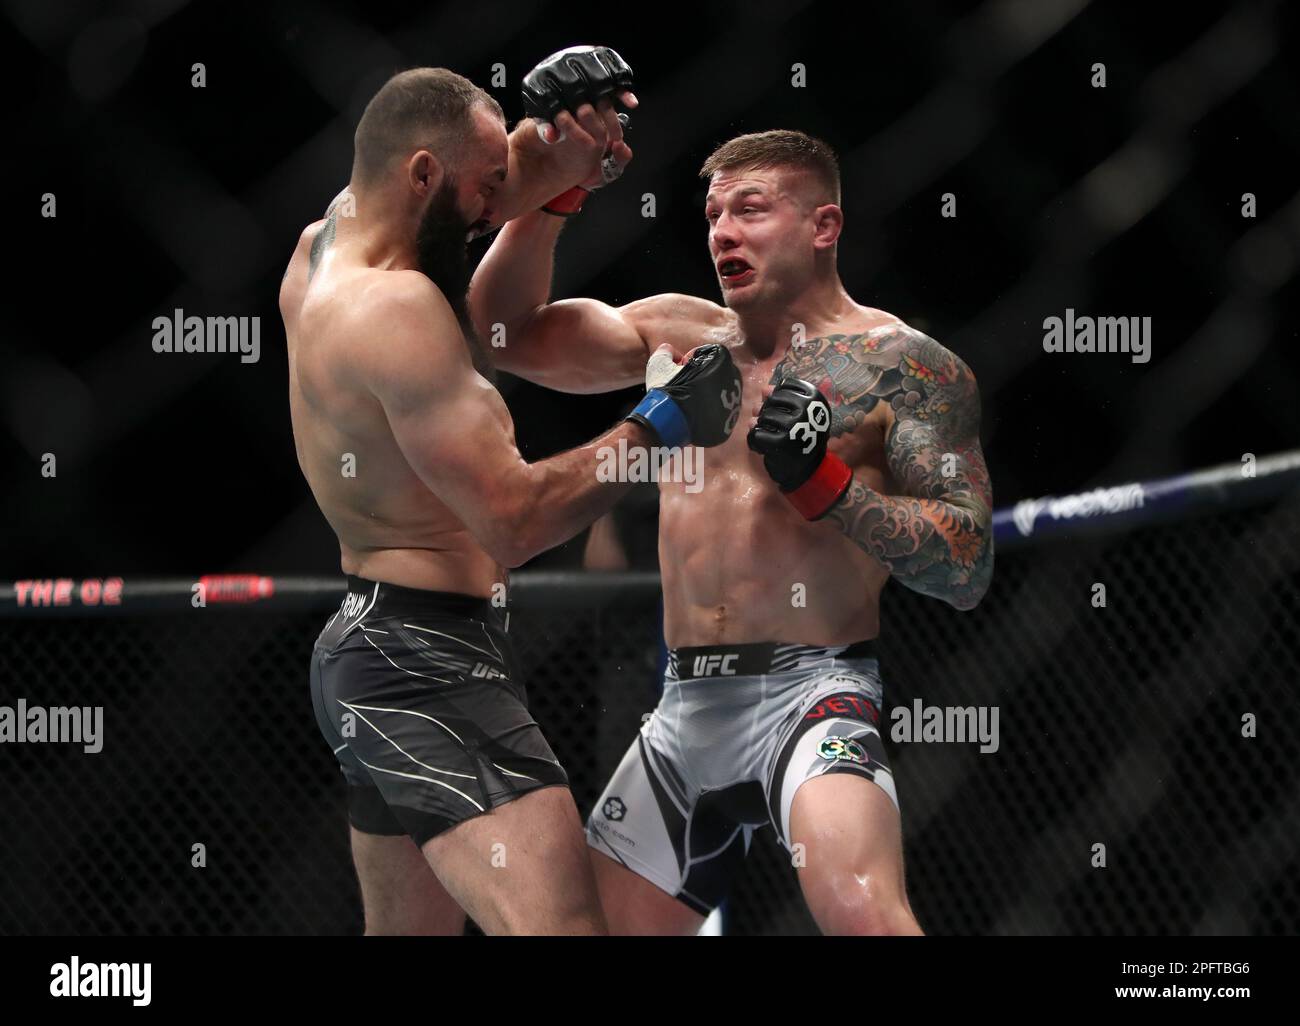 Marvin Vettori (right) in action against Roman Dolidze in their middleweight bout during UFC 286 at O2 Arena, London Picture date Saturday March 18, 2023 Stock Photo